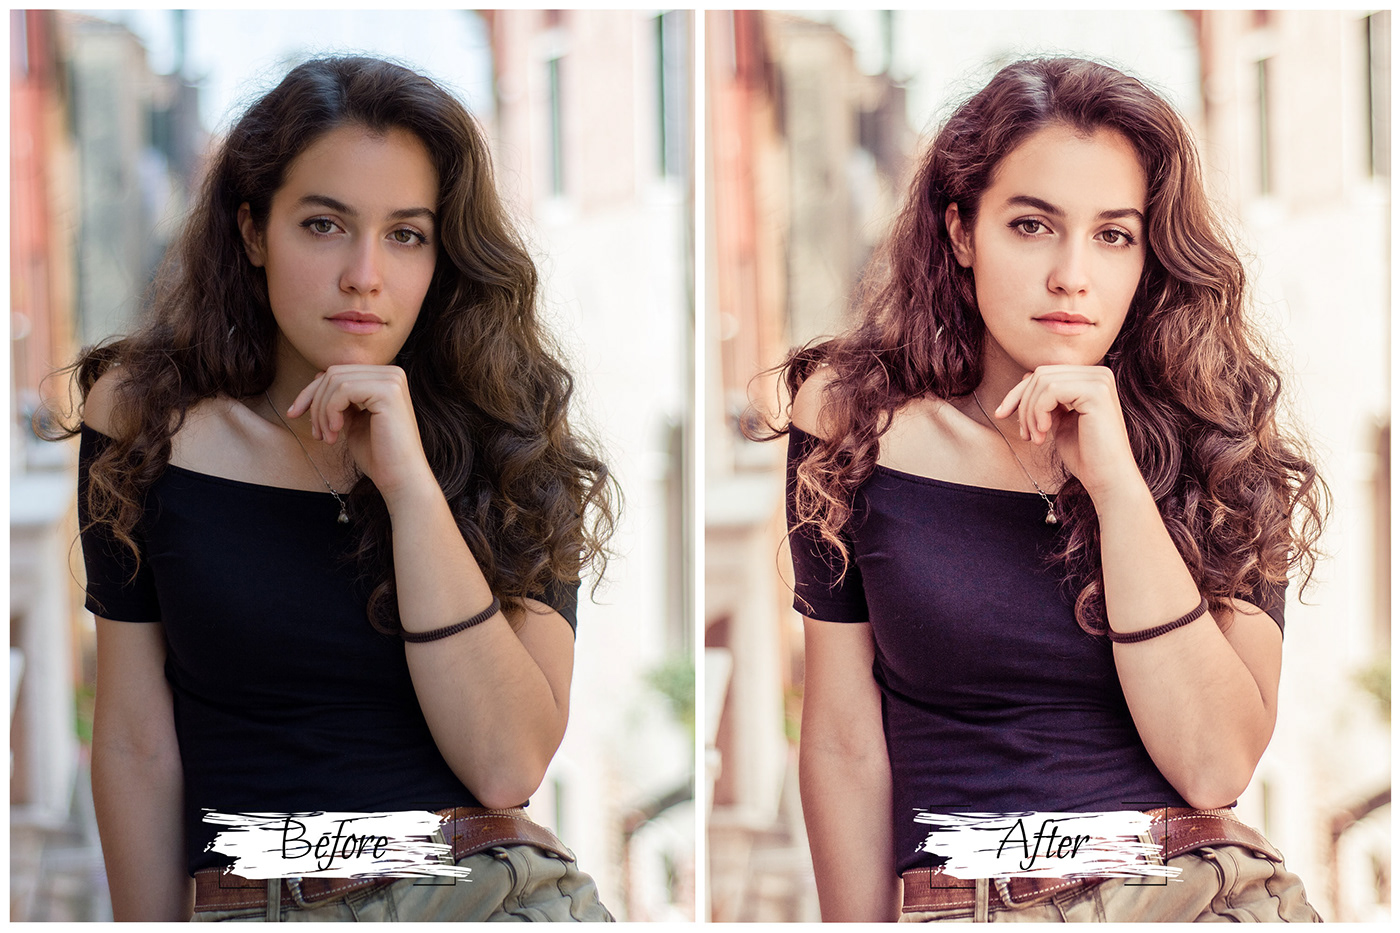 ACR Camera raw presets brown tone Instagram Photo Filter Italy Photo Presets lightroom presets LUT cube filter mobile presets nude theme photoshop action Turin Photography